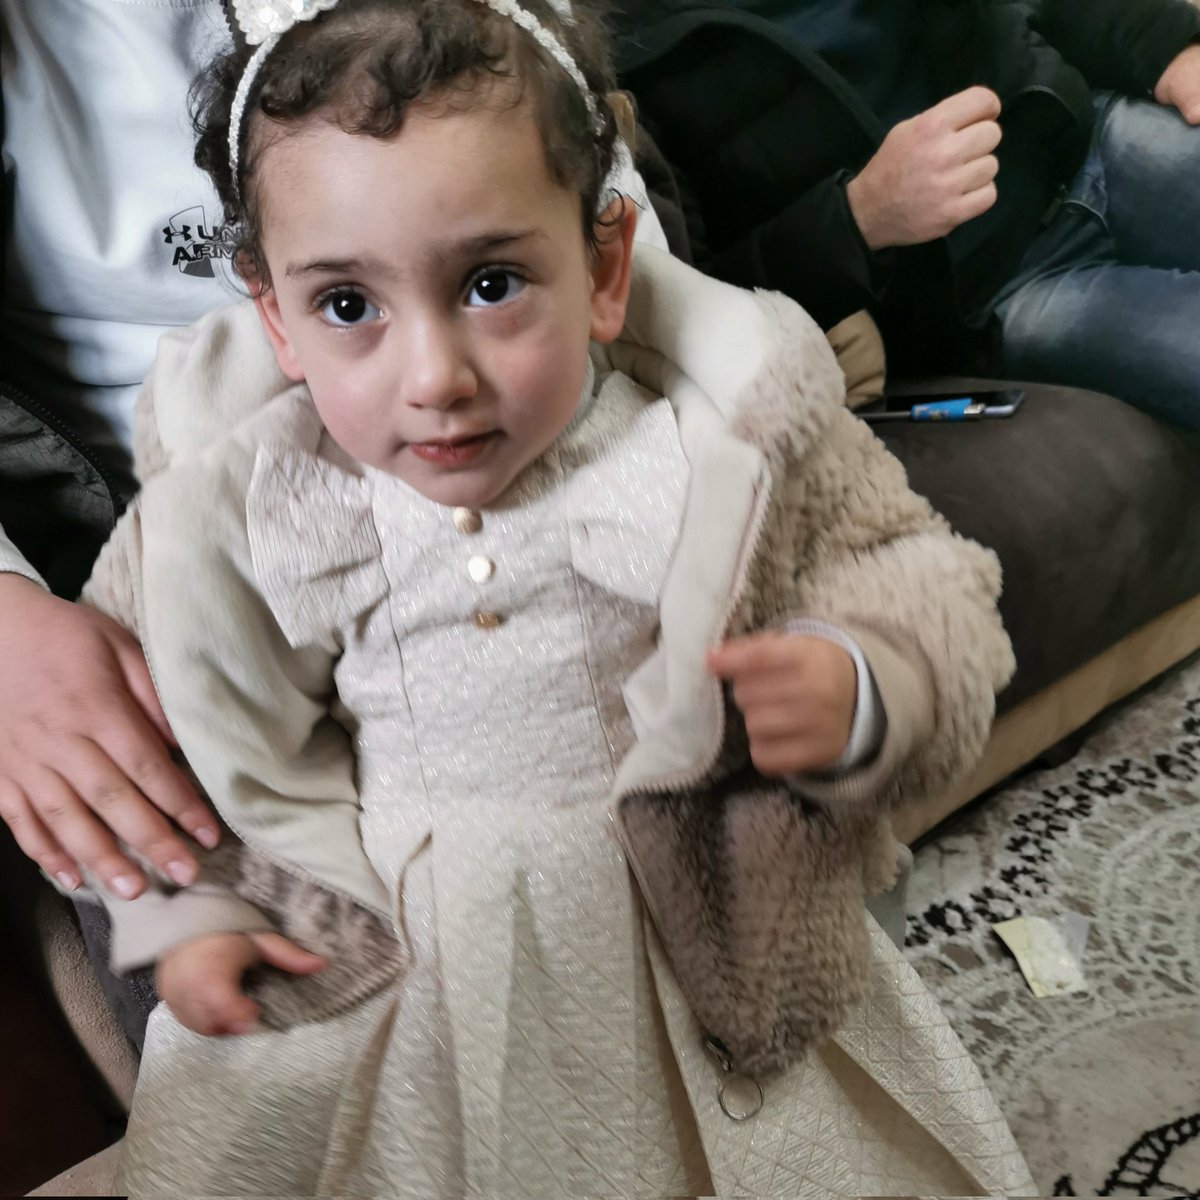 Maria is a two-year-old Palestinian girl from the Gaza Strip. Her parents were killed in the current war. The humanitarian and health situation in the Gaza Strip is extremely catastrophic. There is a real famine,  paypal.com/pools/c/944Kvf…
#peoplehelpingpeople